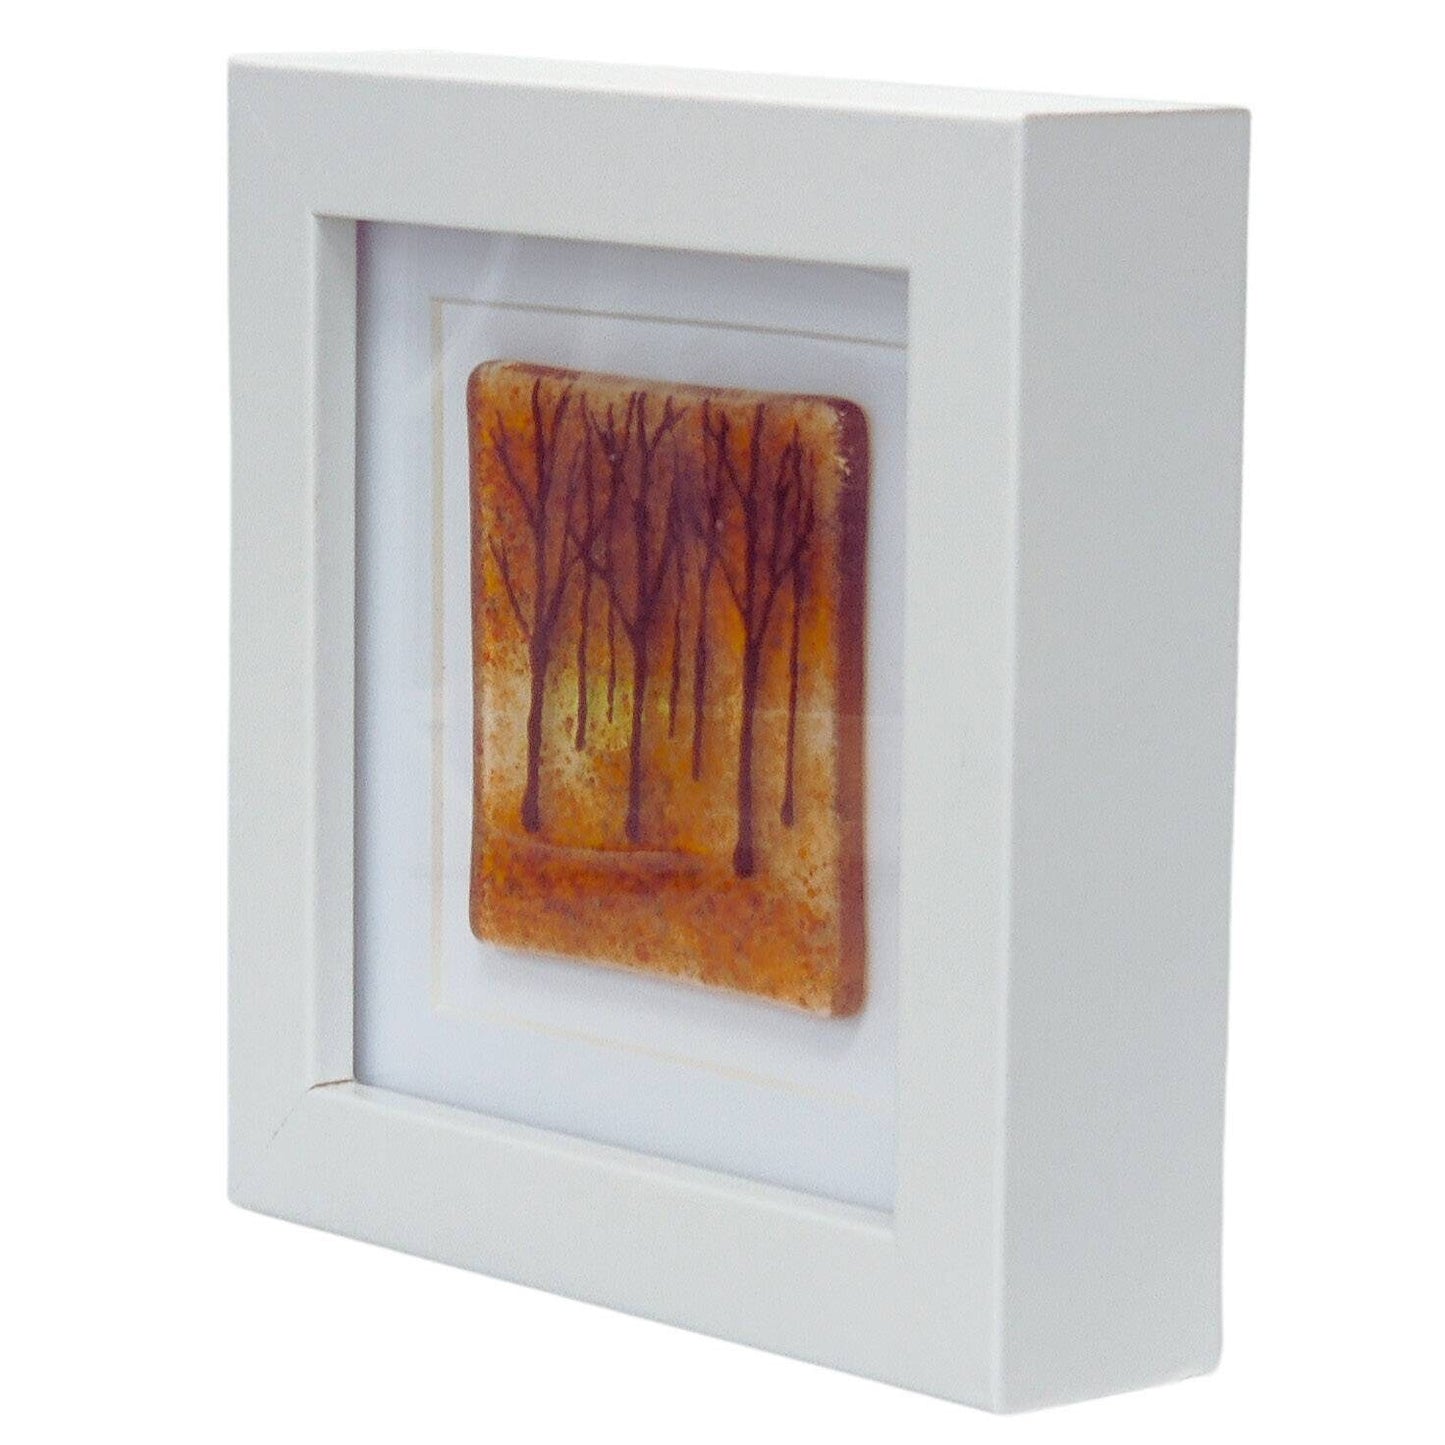 Fused glass small framed picture, mini fused glass art, Autumn forest, fused glass trees picture